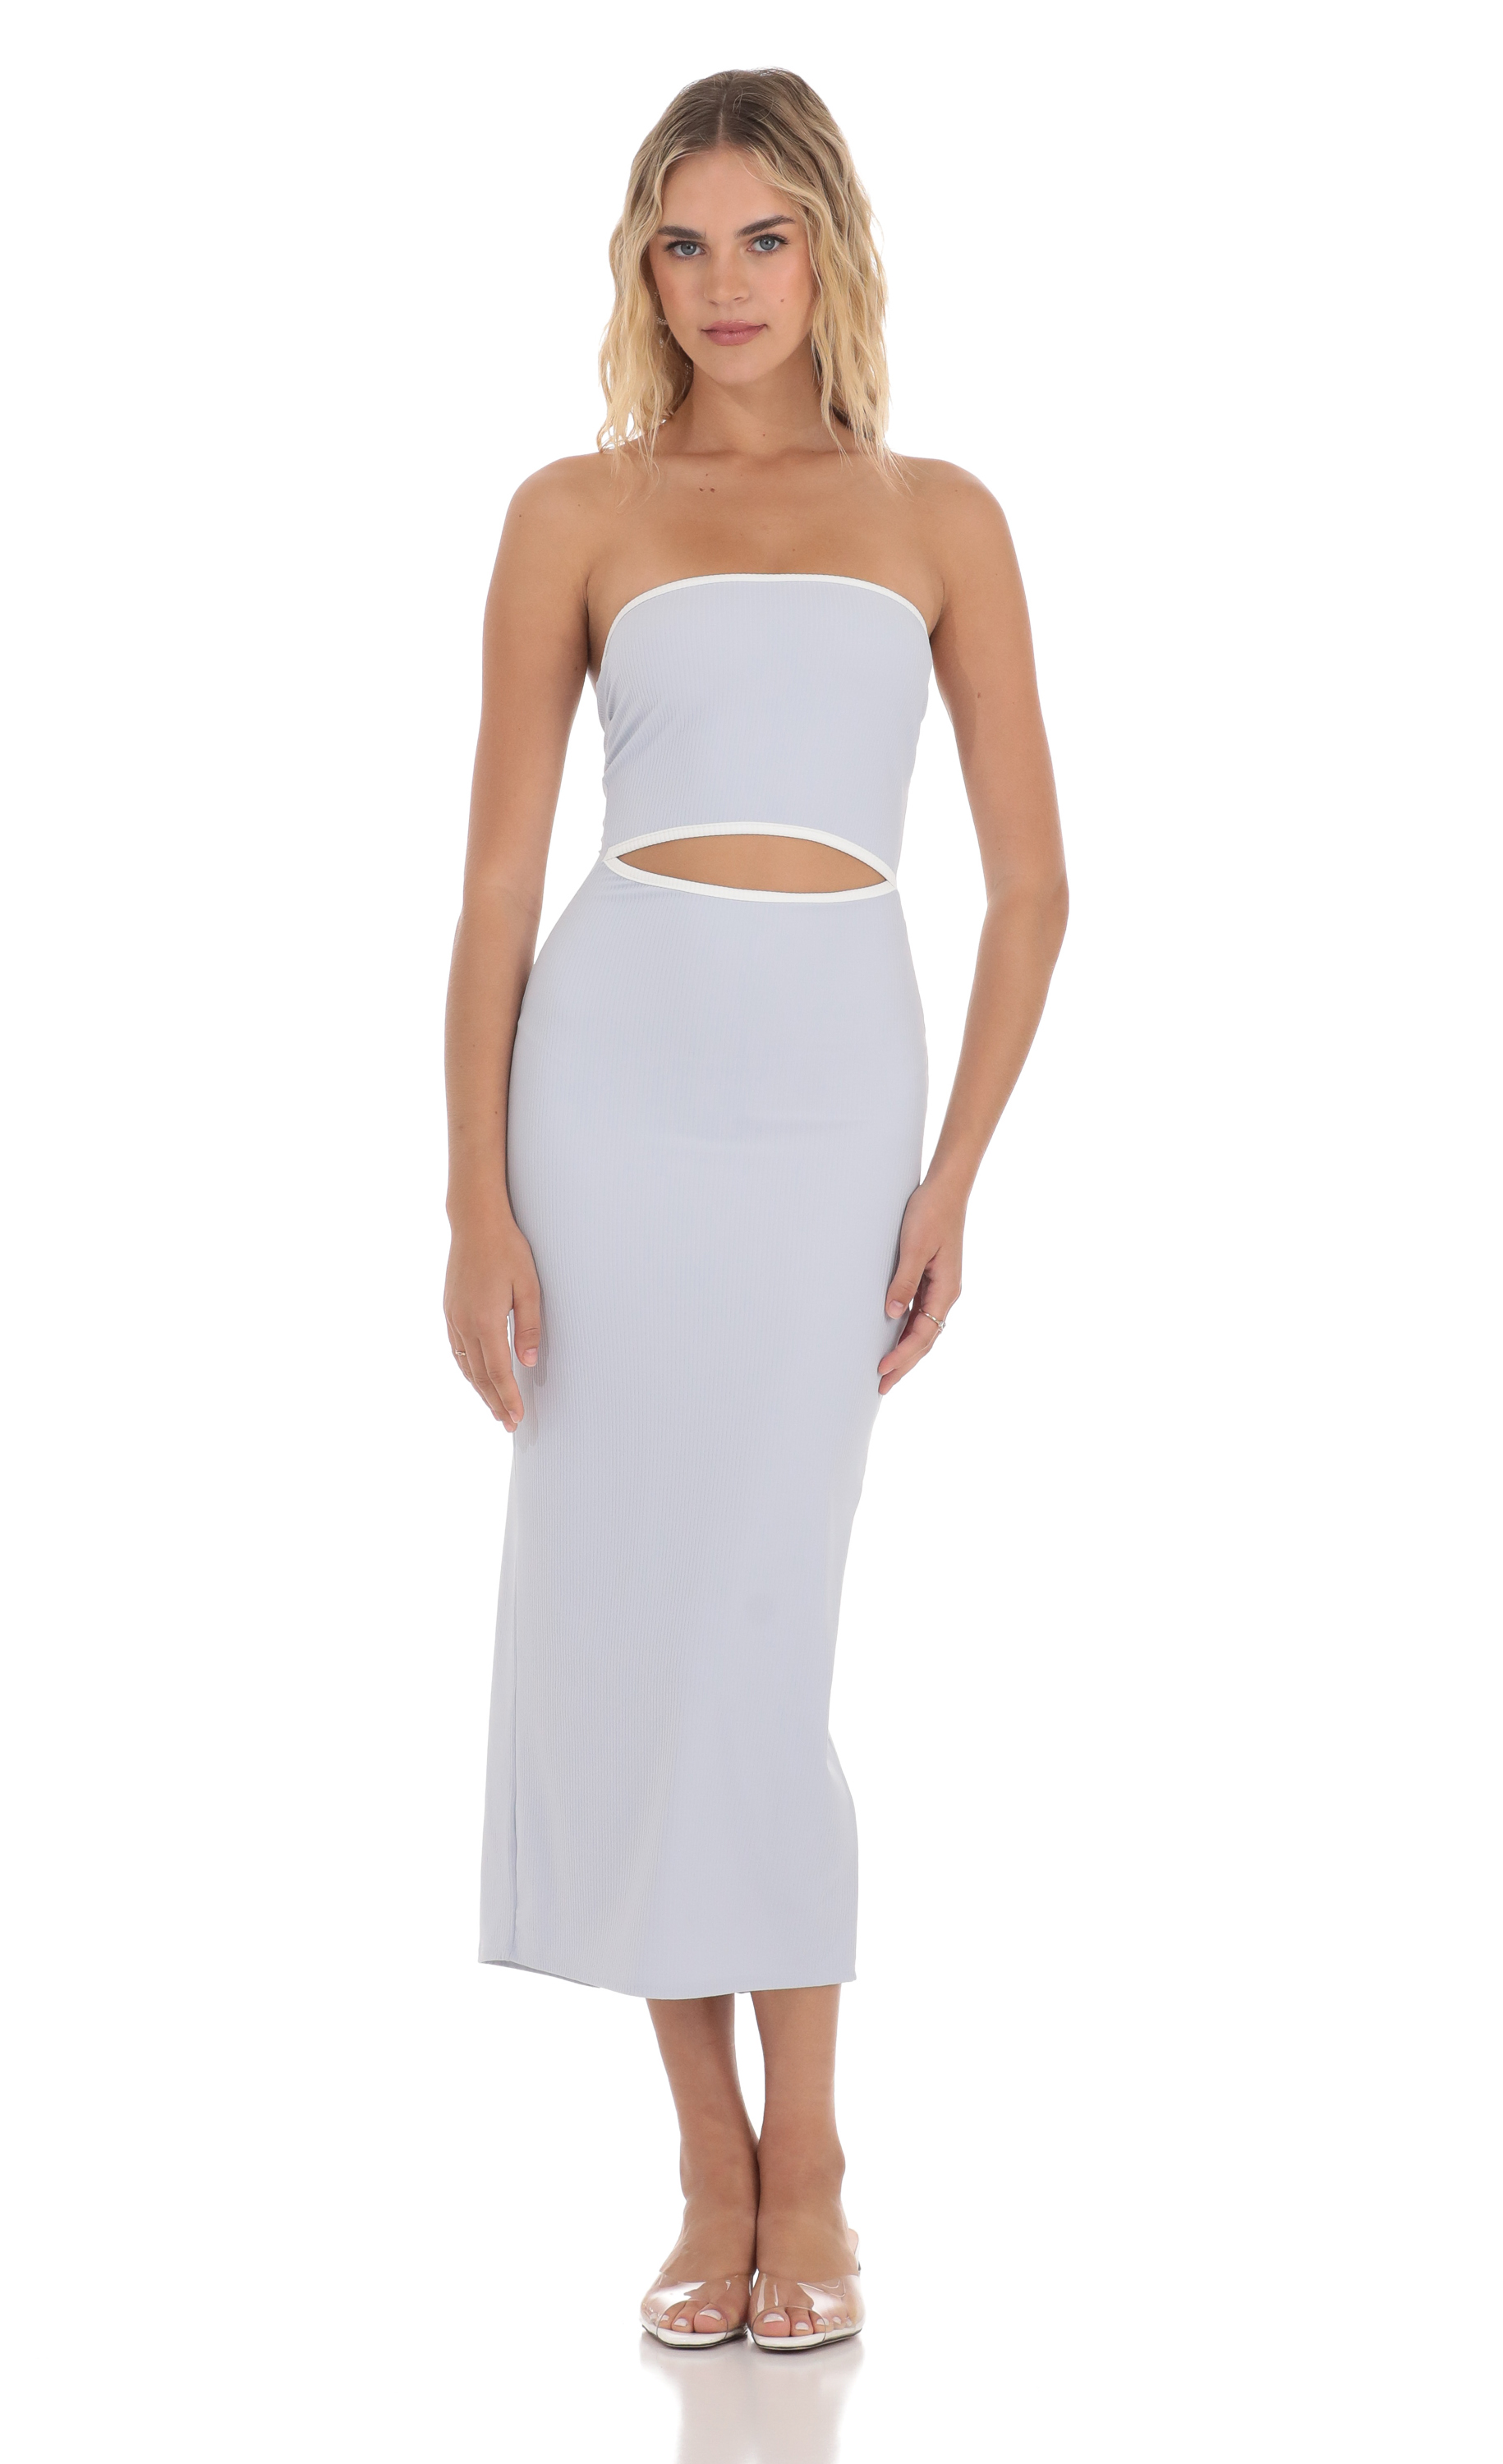 Ribbed Cutout Strapless Midi Dress in Light Blue